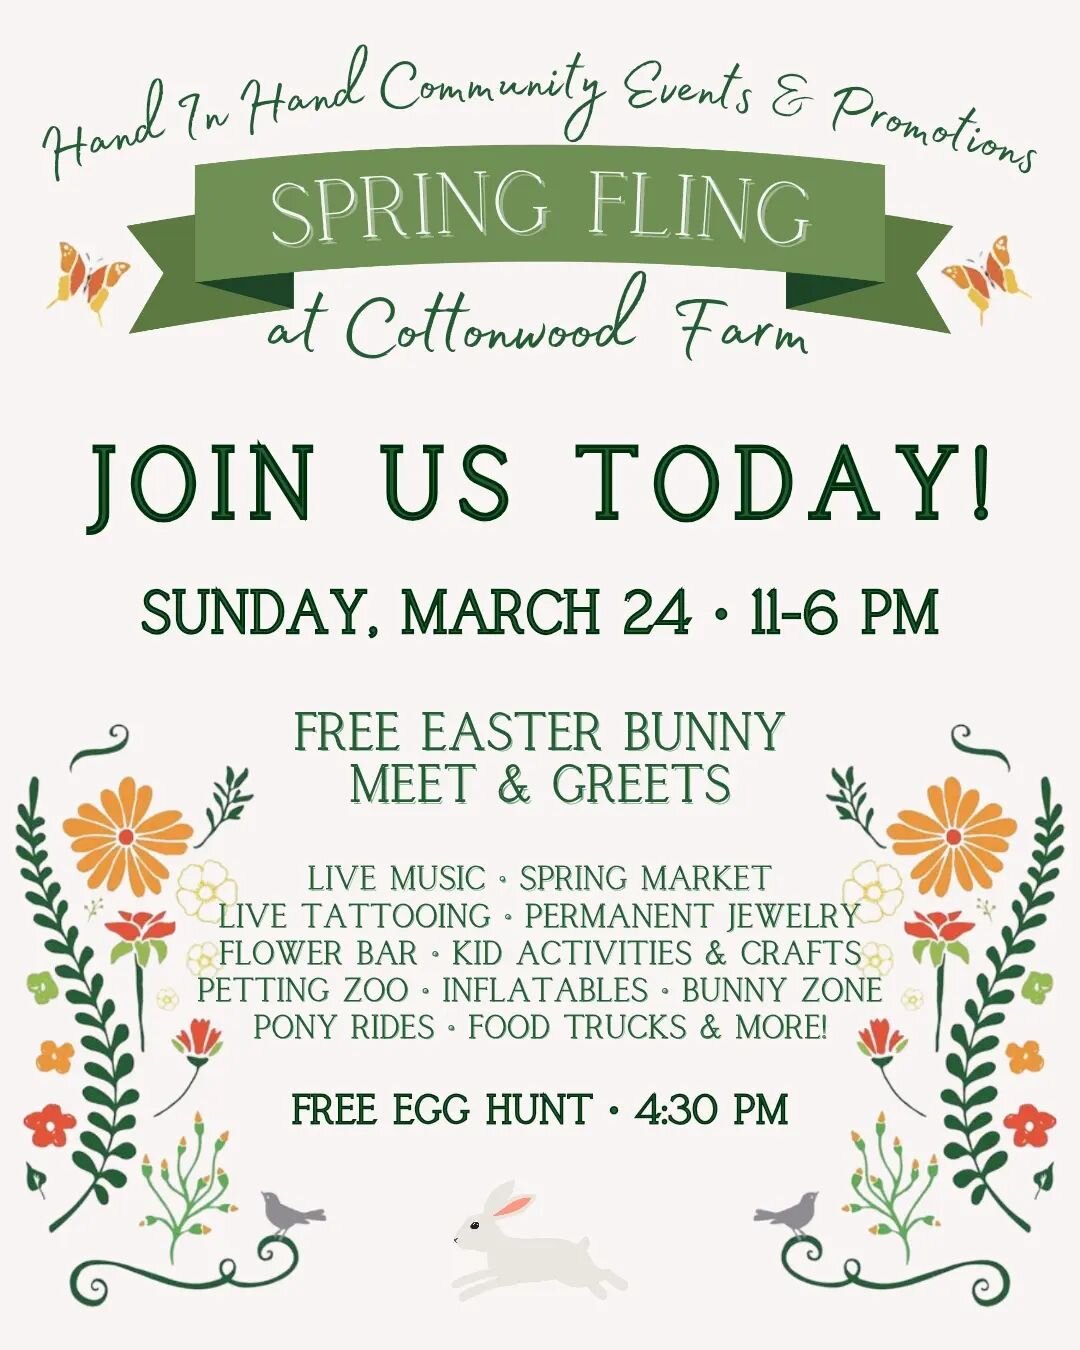 ✨JOIN US TODAY!!!✨

Spring Fling at Cottonwood Farm 
SUNDAY, MARCH 24TH &bull;  11-6 PM

Come out to the farm for an exciting day full of festivities! You will find artisan &amp; handmade goods, interactive activities, delicious food, local boutiques